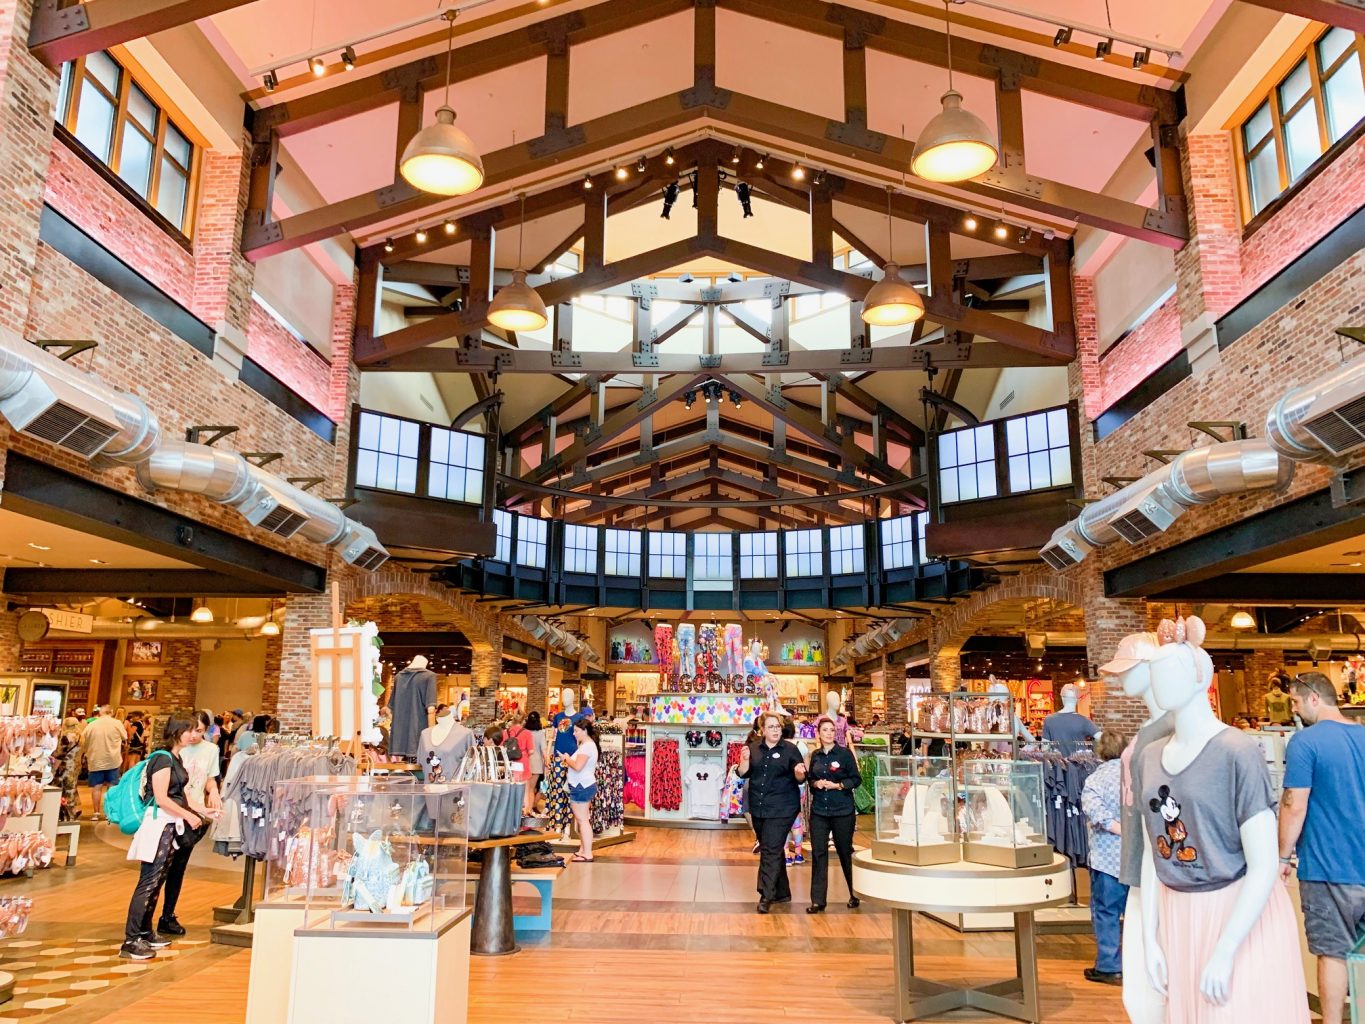 the World of Disney store at Disney Springs